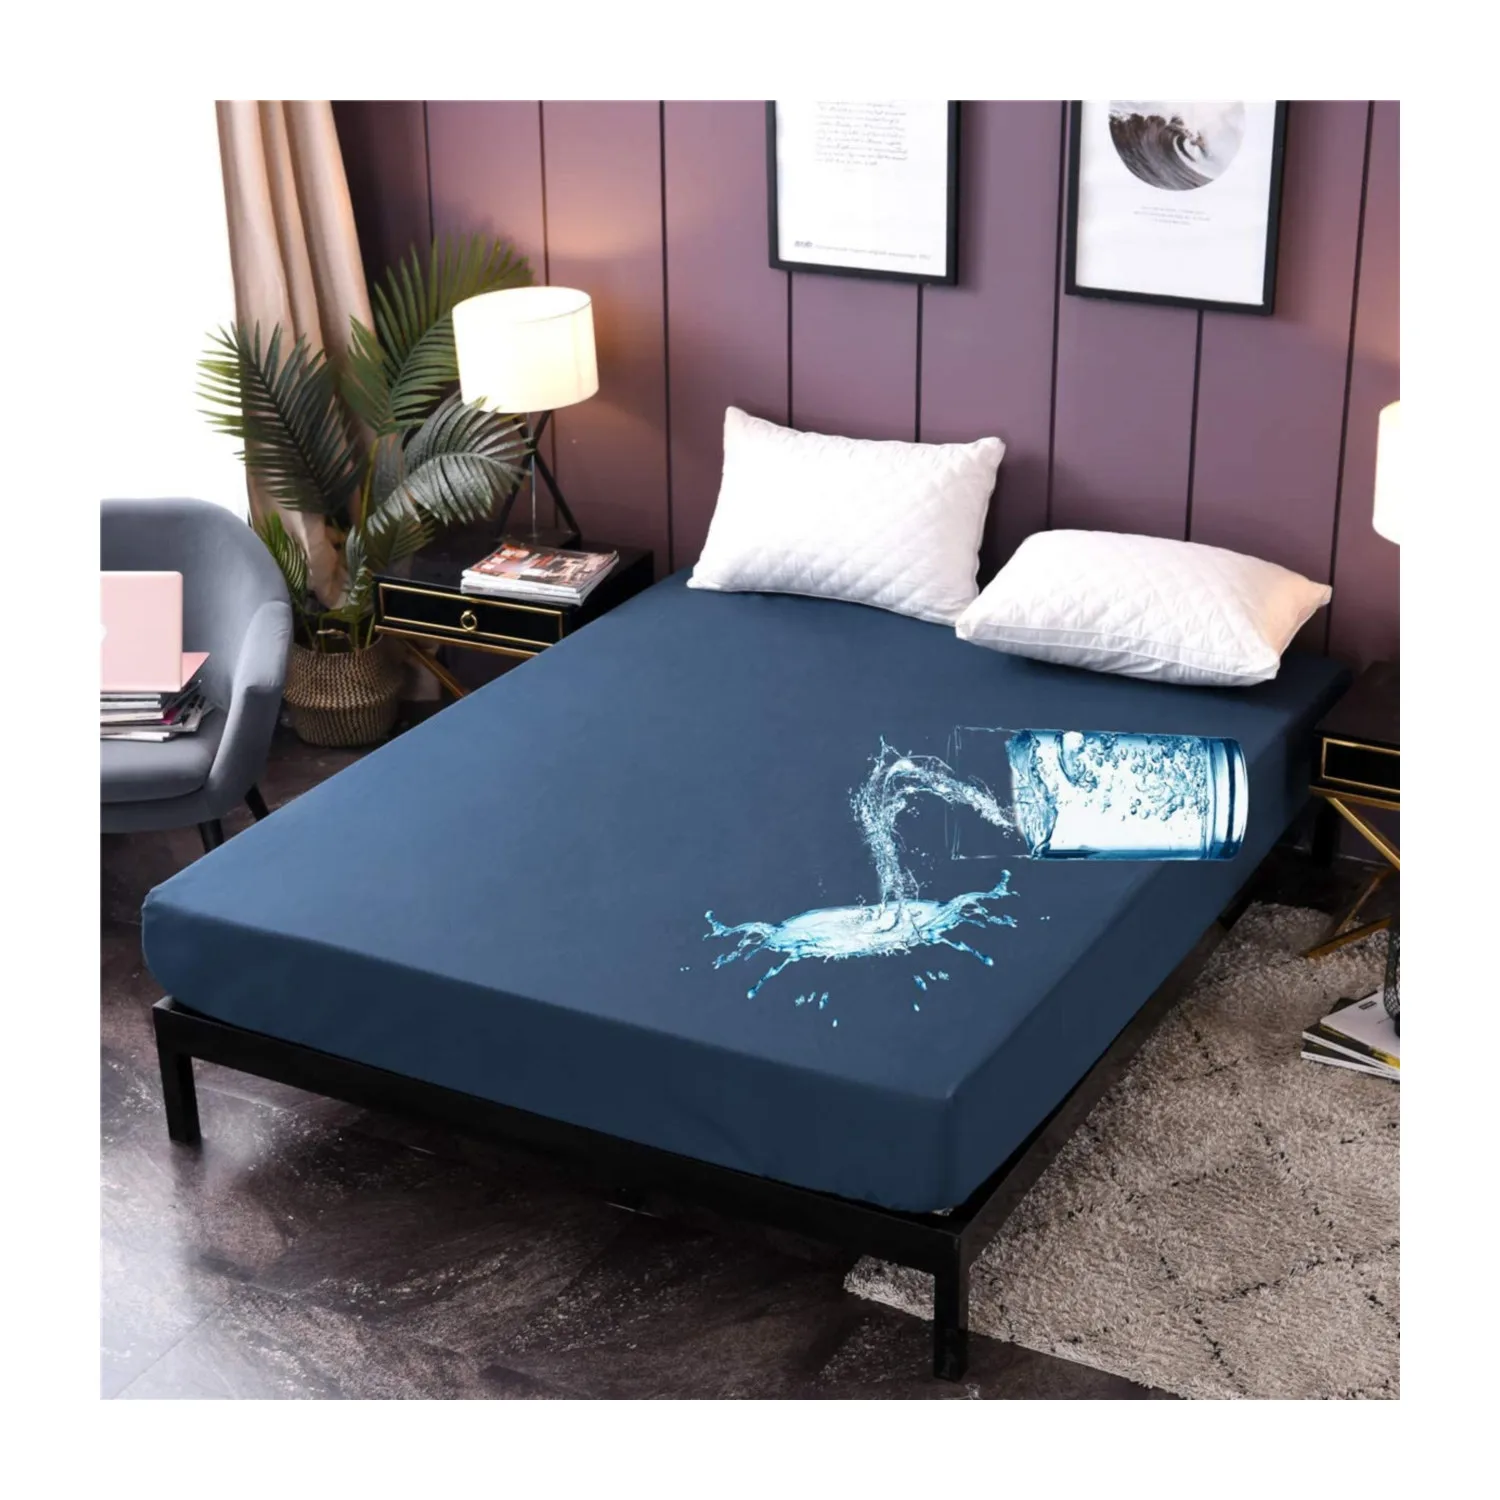 Stretchable King Bed Spread Cover Sheet Fiber Waterproof Mattress Cover Protector